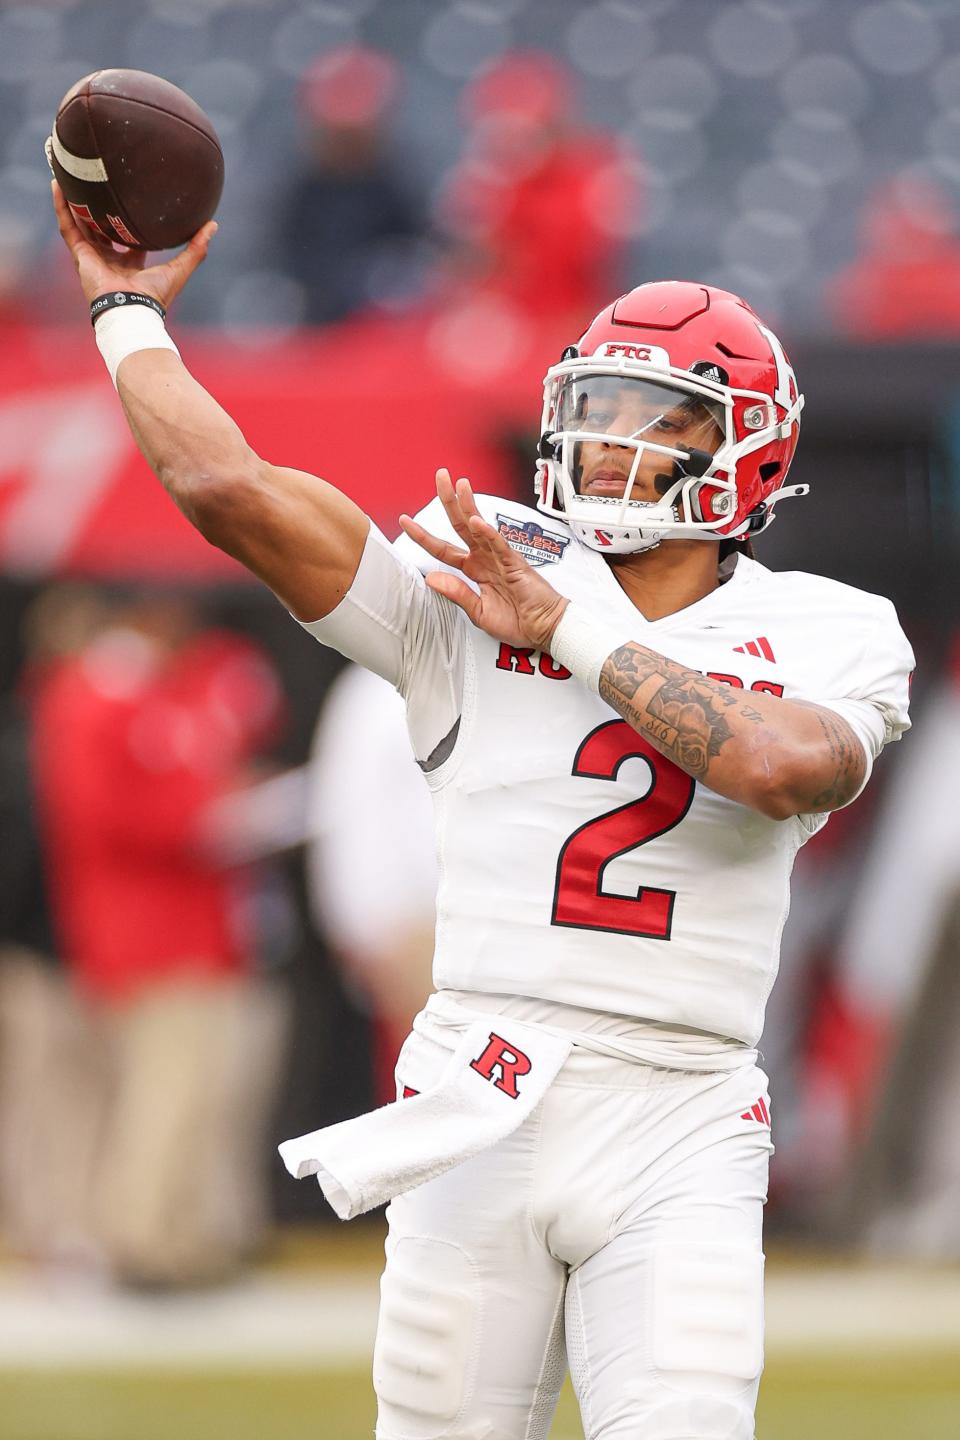 Dec 28, 2023; Bronx, NY, USA; Rutgers Scarlet Knights quarterback Gavin Wimsatt (2) warms up before the game against the Miami Hurricanes at Yankee Stadium. Mandatory Credit: Vincent Carchietta-USA TODAY Sports